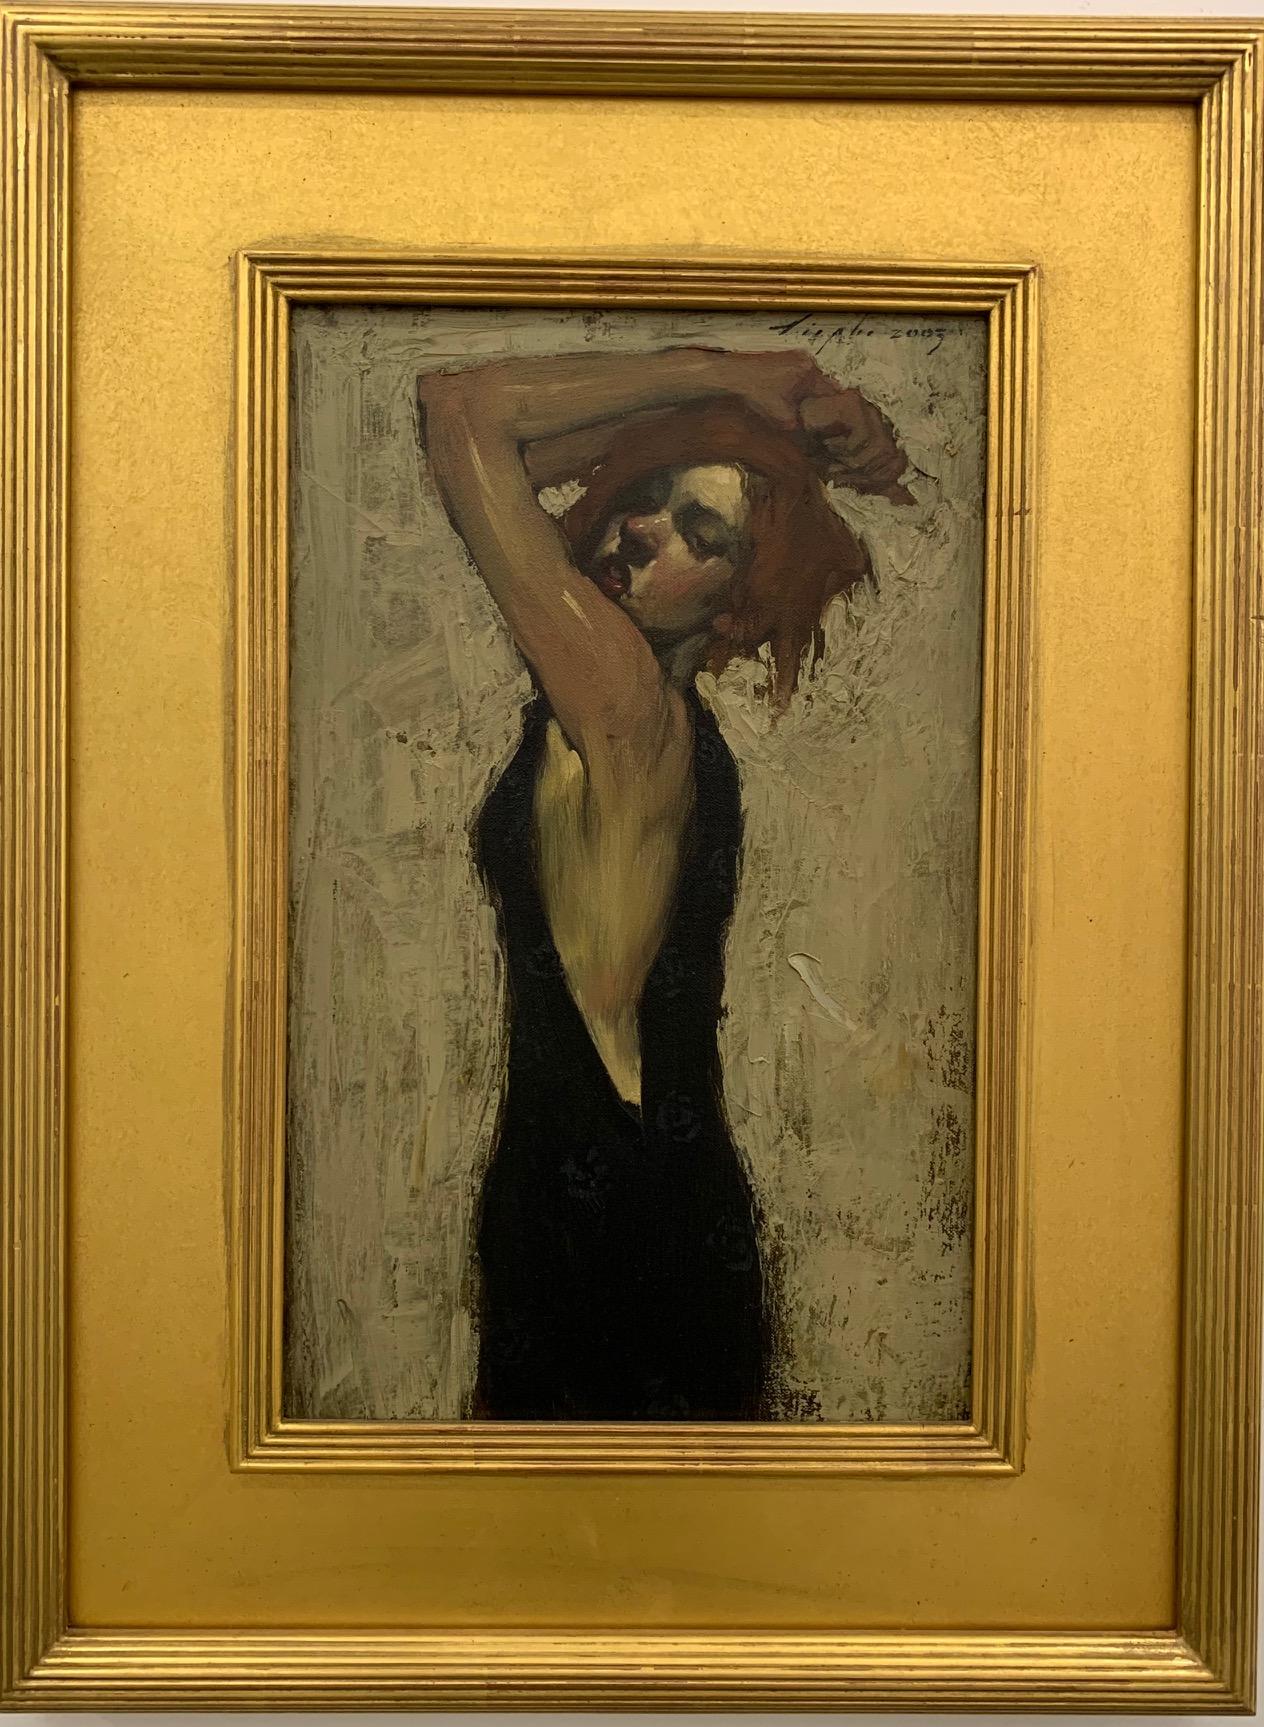 Malcolm Liepke Figurative Painting - "Arms Overhead, " Artwork, Contemporary, Female Figure, Expressionistic, Painting